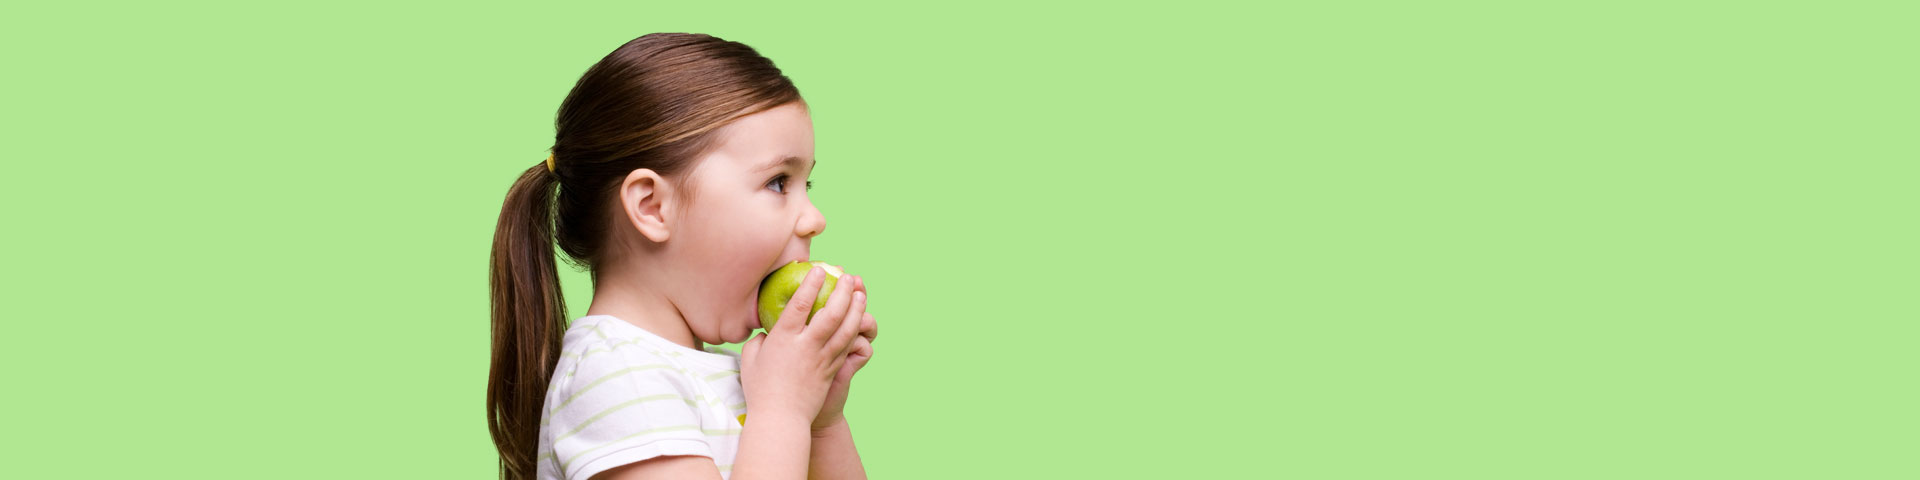 Child Nutrition Food Guide